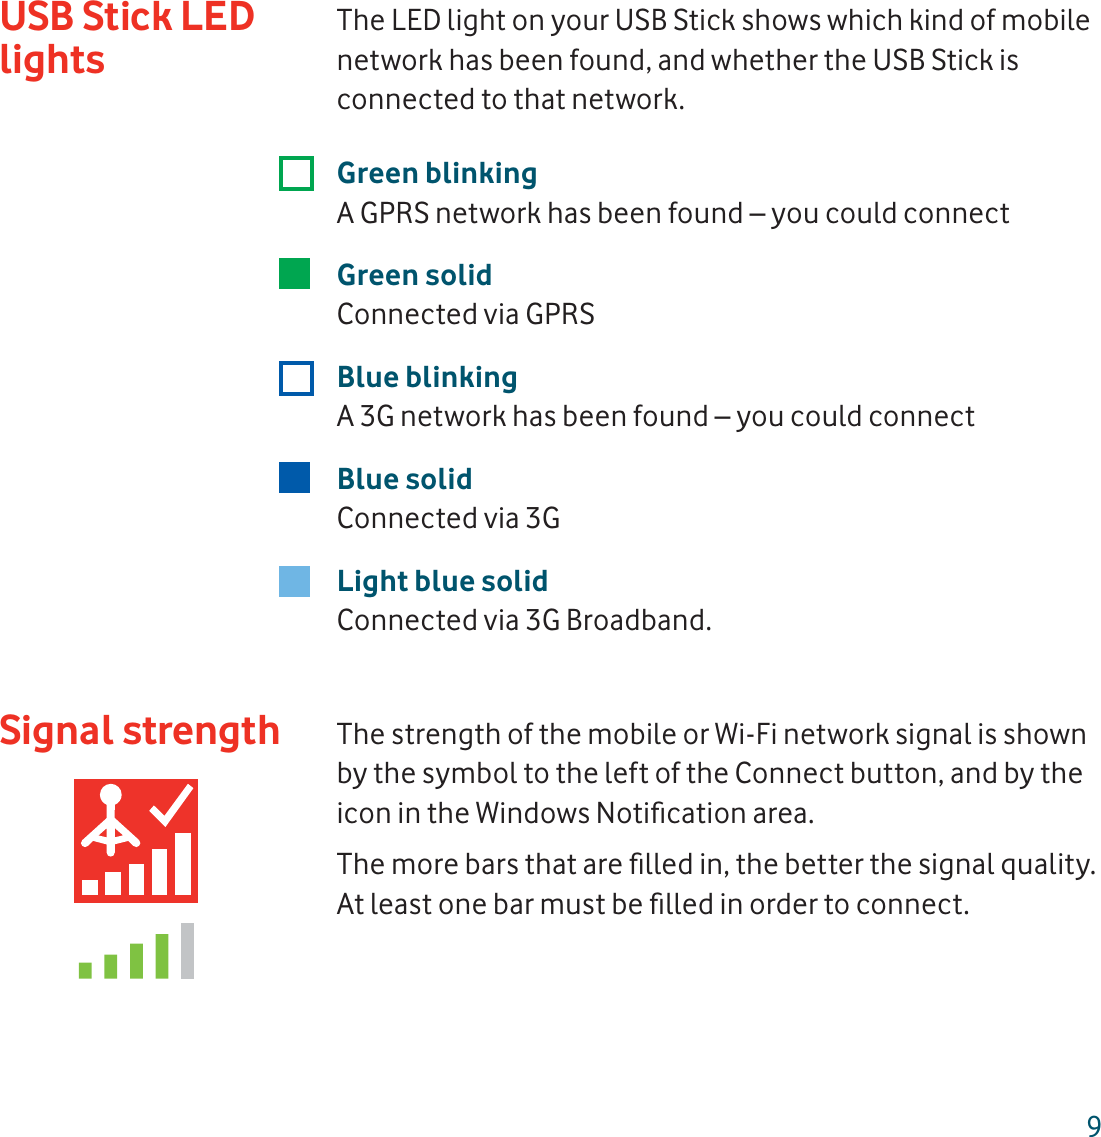 9Signal strengthThe LED light on your USB Stick shows which kind of mobile network has been found, and whether the USB Stick is connected to that network.Green blinkingA GPRS network has been found – you could connectGreen solidConnected via GPRS Blue blinkingA 3G network has been found – you could connectBlue solidConnected via 3GLight blue solidConnected via 3G Broadband.The strength of the mobile or Wi-Fi network signal is shown by the symbol to the left of the Connect button, and by the icon in the Windows Notiﬁ cation area. The more bars that are ﬁ lled in, the better the signal quality. At least one bar must be ﬁ lled in order to connect.USB Stick LED lights